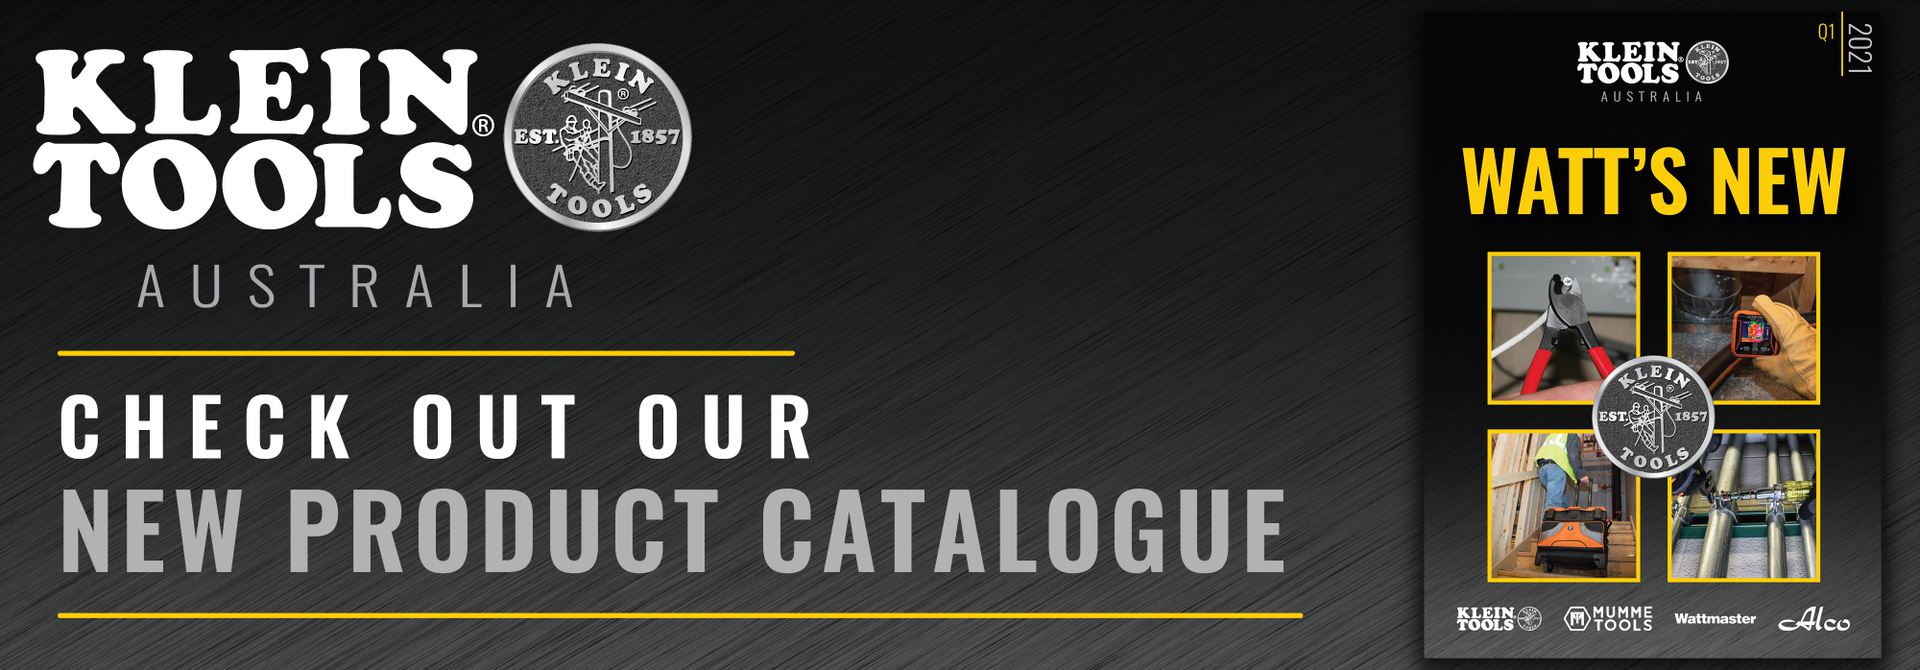 Check out our new product catalogue